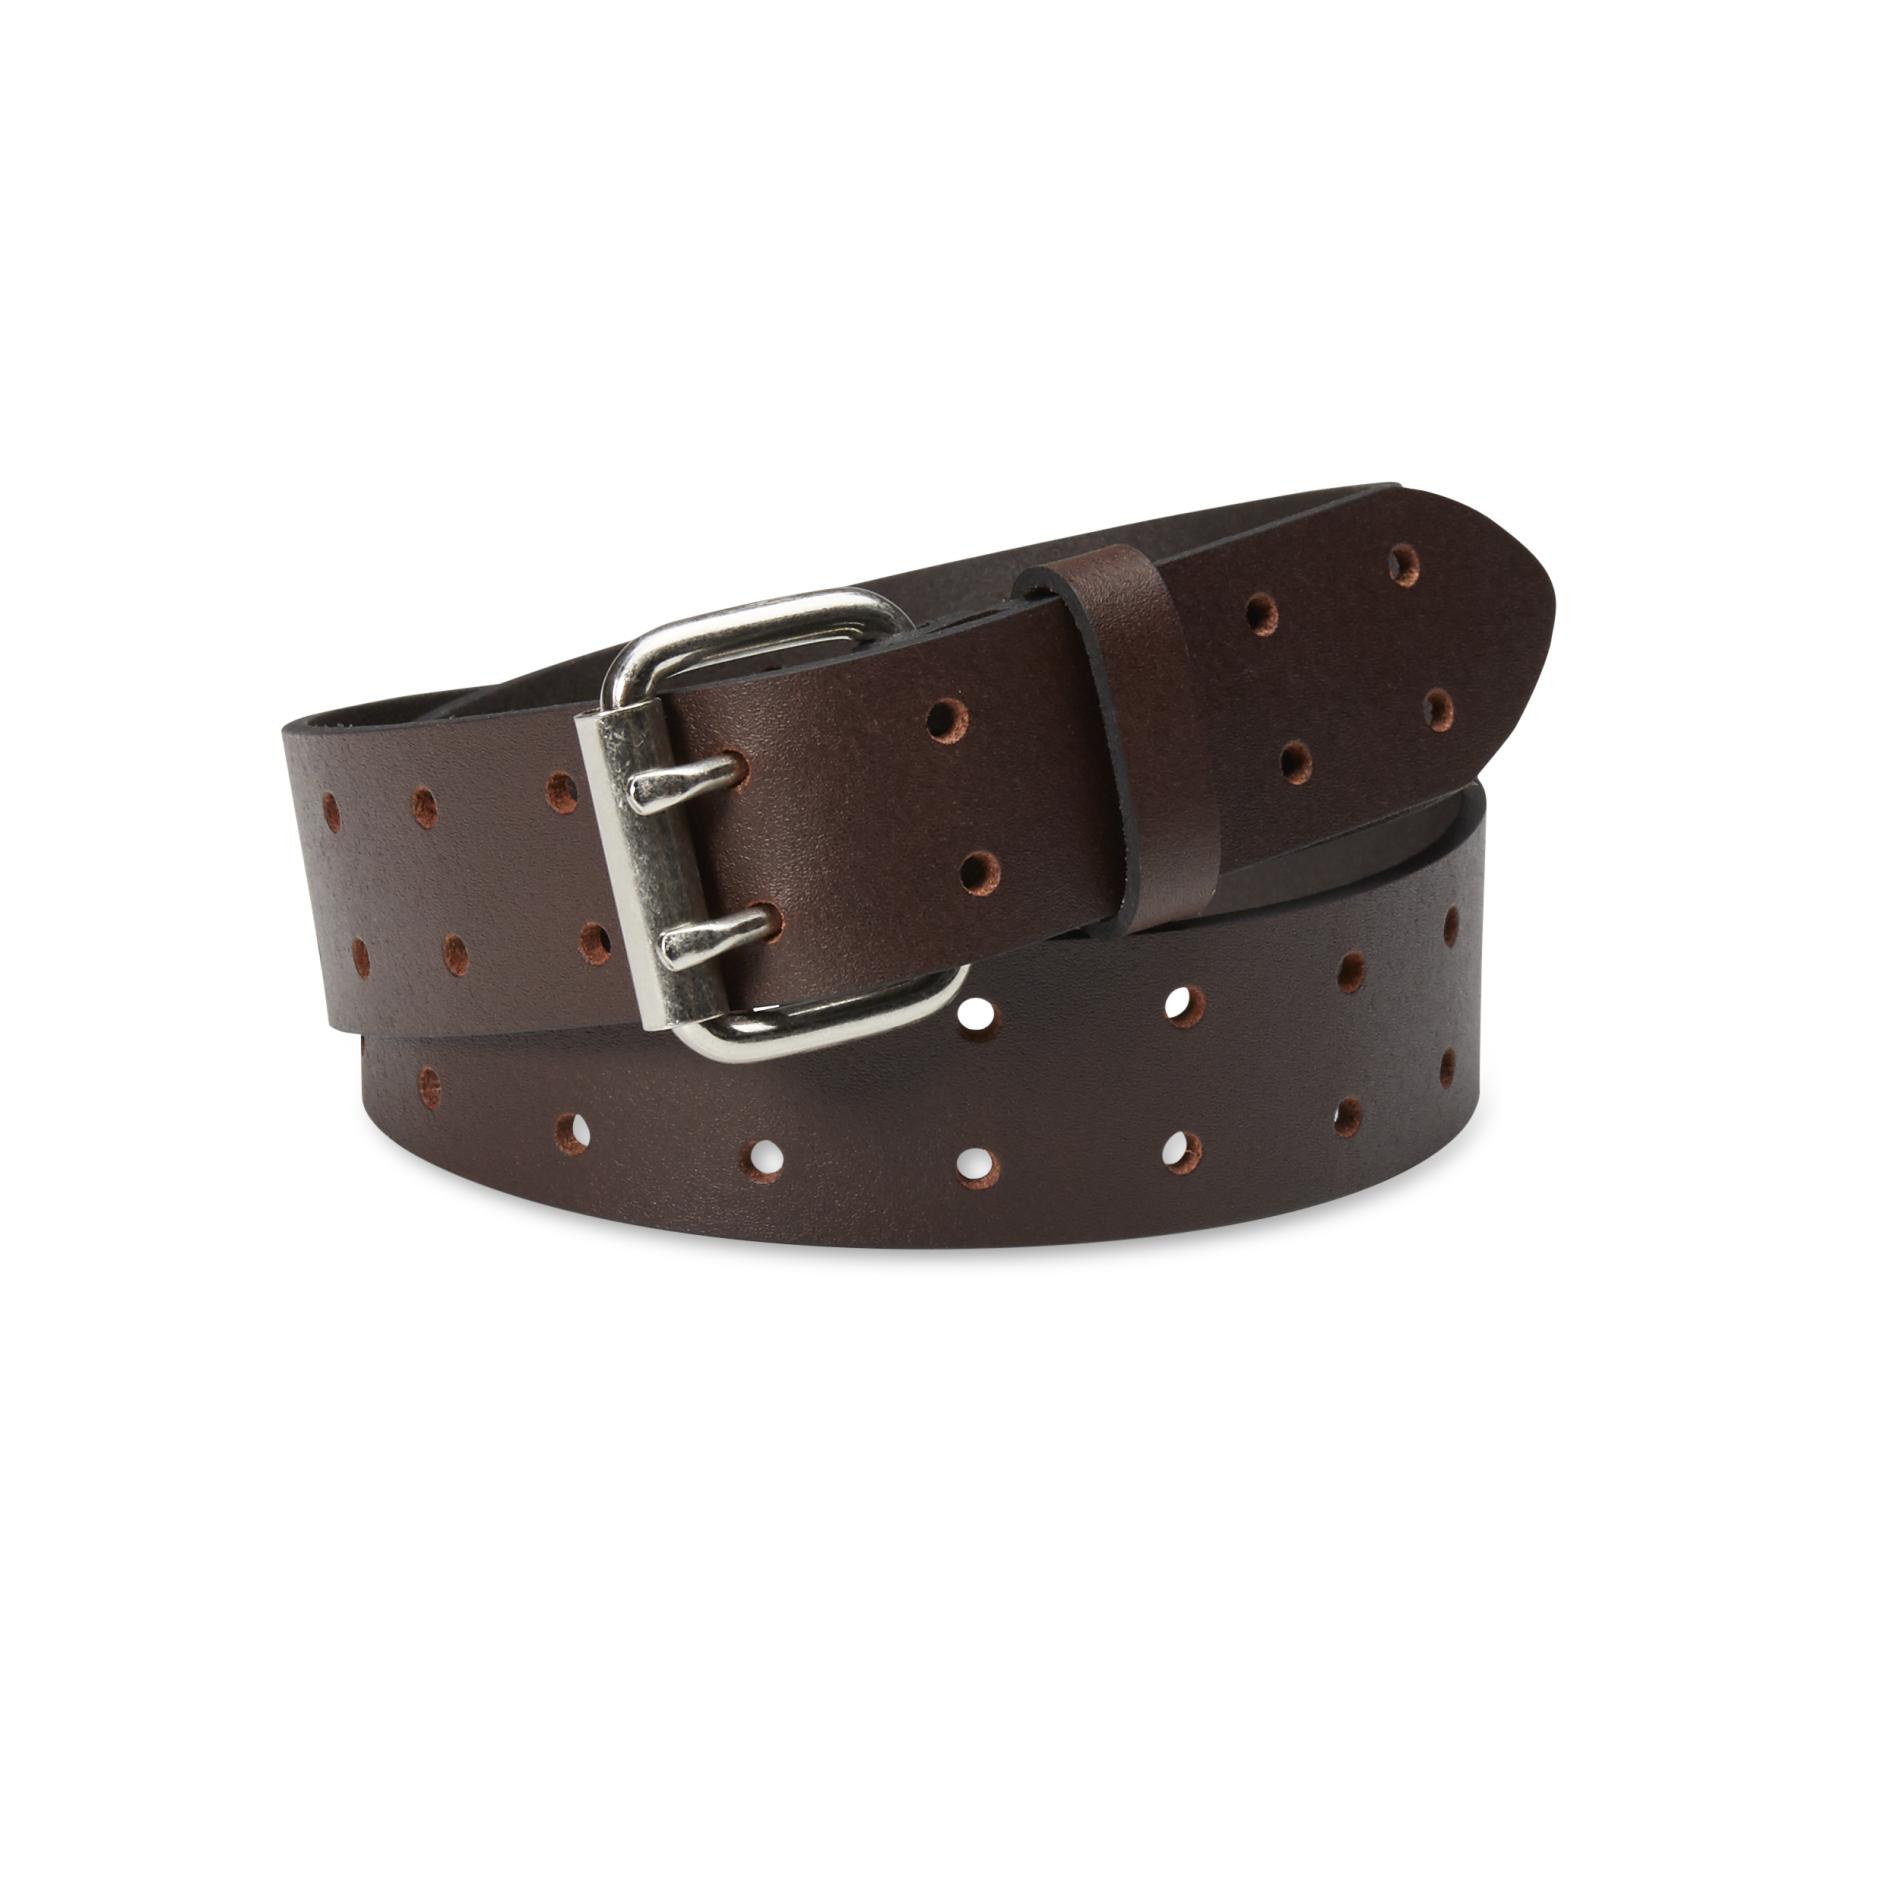 Dickies Men's Double-Prong Leather Belt